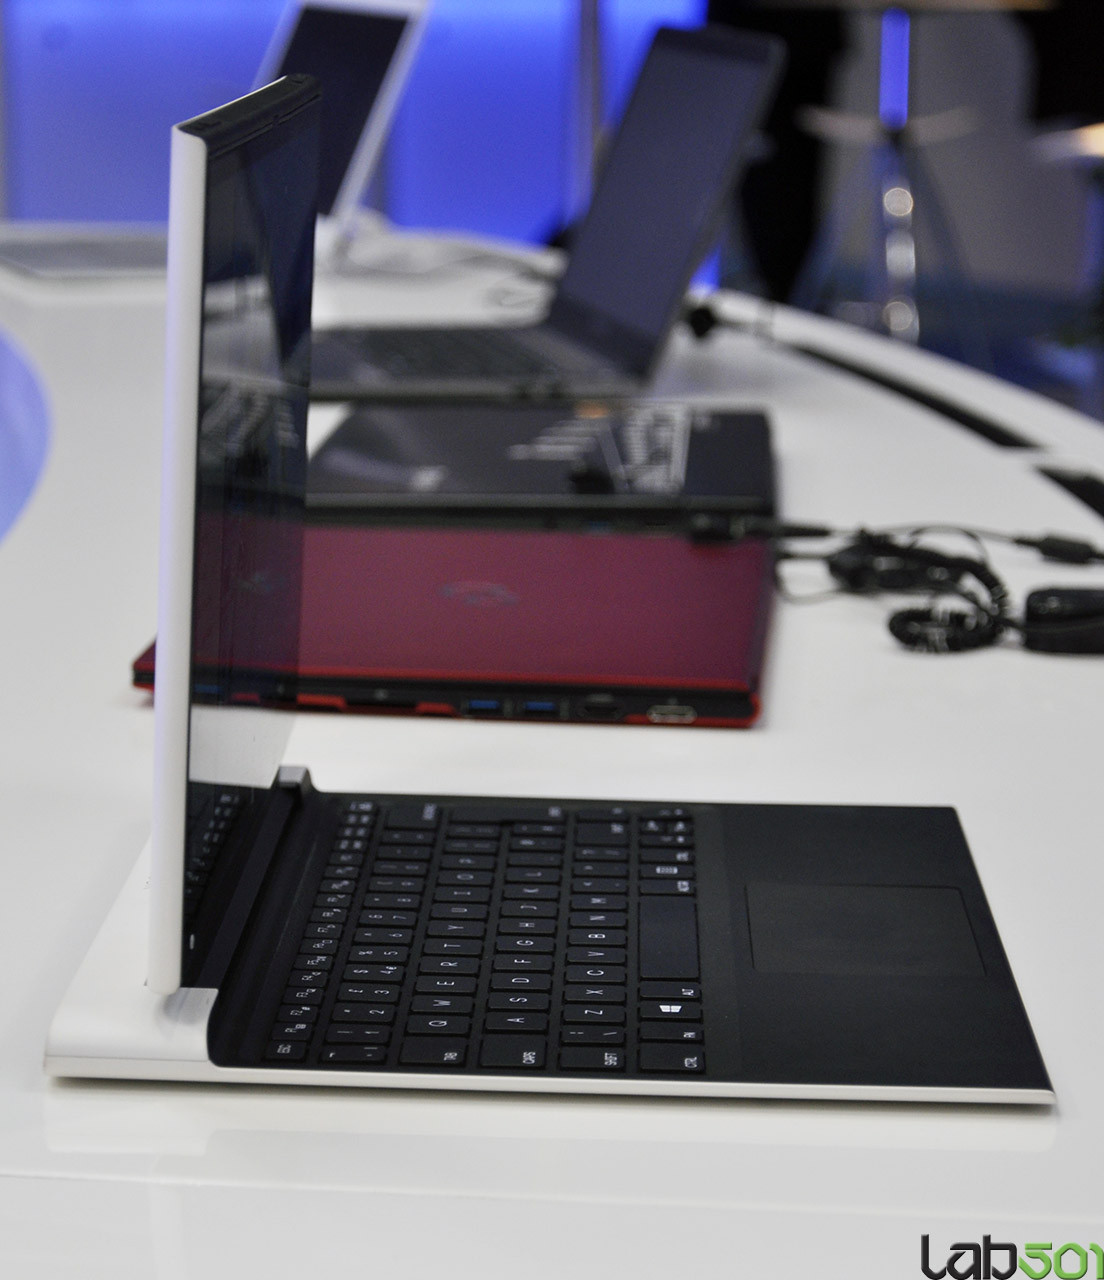 intel-shows-off-haswell-ultrabook-prototype-at-cebit-04